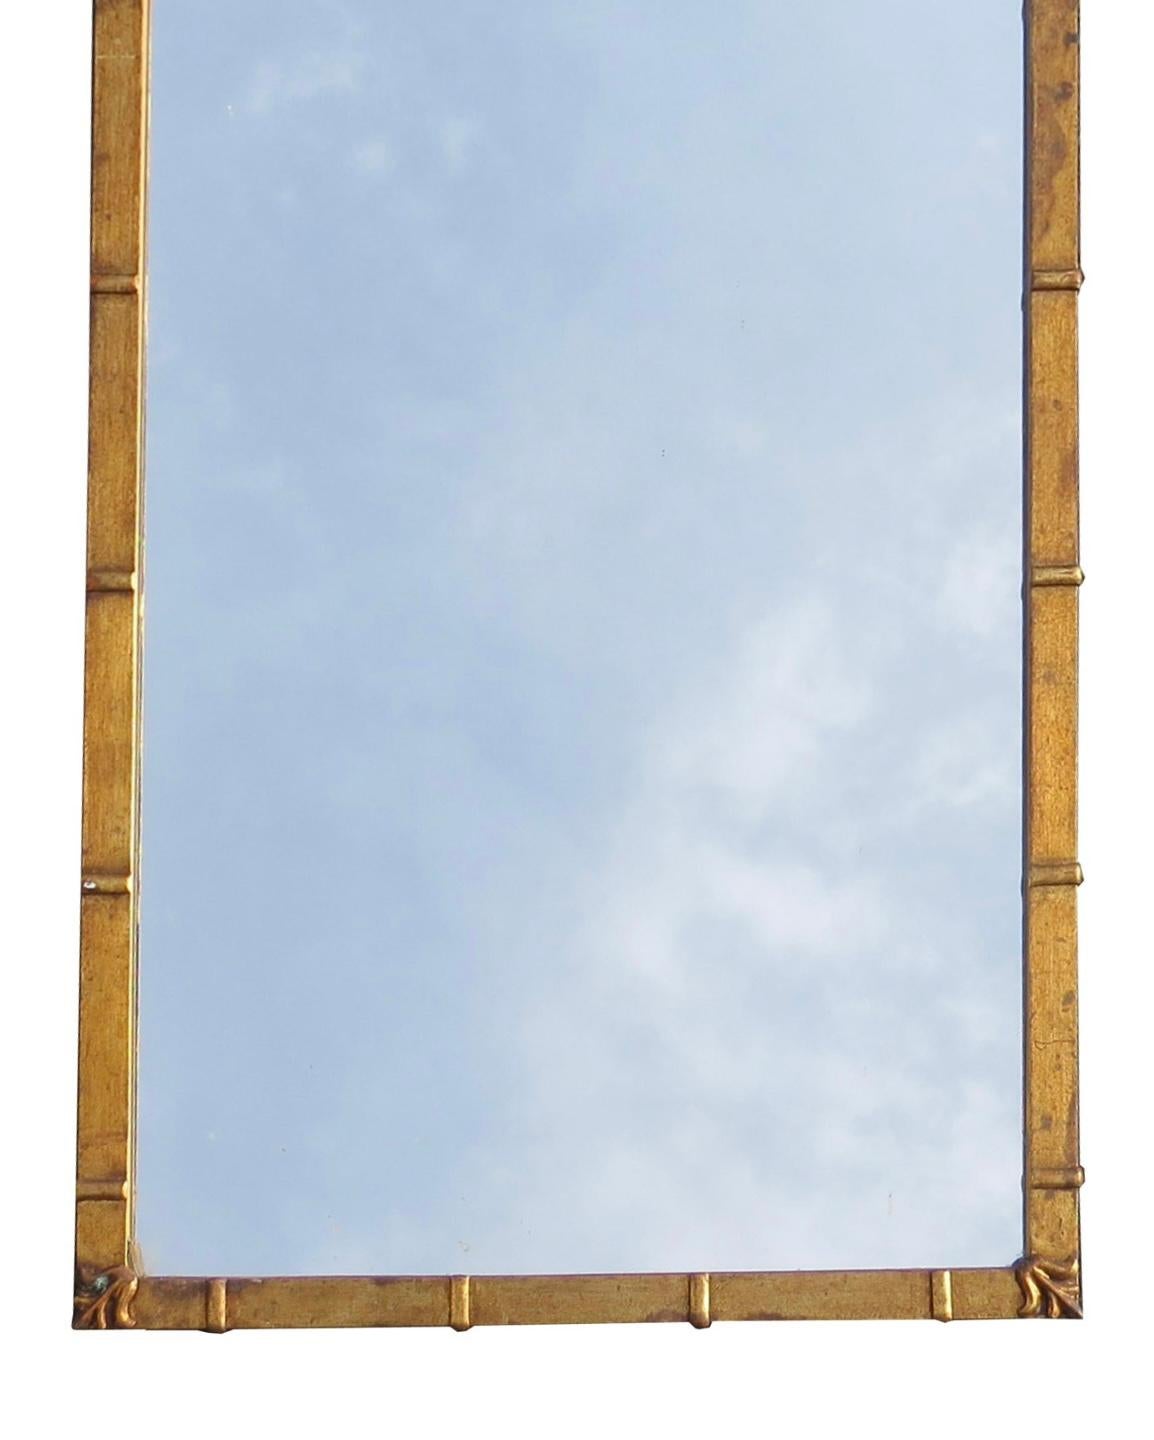 1960s Hollywood Regency rectangular mirror with gilt-metal frame by Palladio (Italy). This stunning mirror topped with an interlaced tole crest above a rectangular frame interspersed with raised elements and fleur-de-lis at corners.